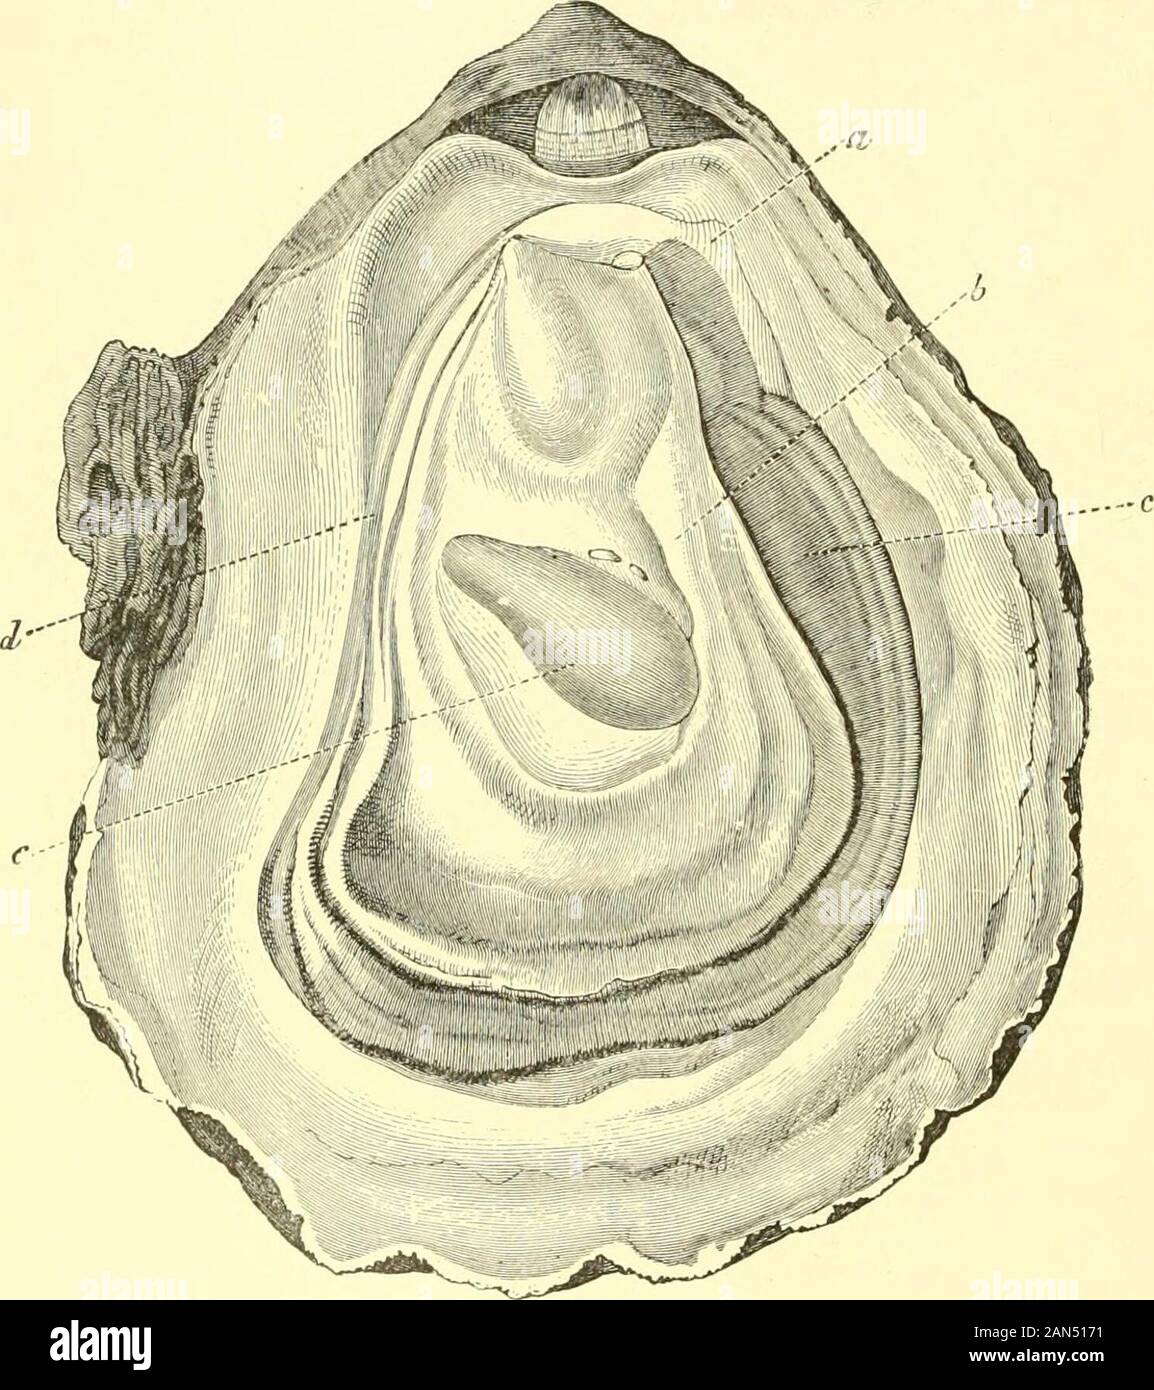 The royal natural history . sed bya single adductor. Thesexes are separate inthe American oyster(Ostrea virginiana),but united in theBritish 0. edulis. Ina gastronomic point ofview the oyster standsfar above all othermolluscs, and its arti-ficial cultivation waspractised by theancient Romans, andat the present timeforms a most import-ant industry in manyparts of the globe.The oyster is veryprolific, a single in-dividual of the common species having been estimated to contain over a millionembryos, whilst the American form is said to discharge ten times as many.0. edulis is not full - grown unti Stock Photo